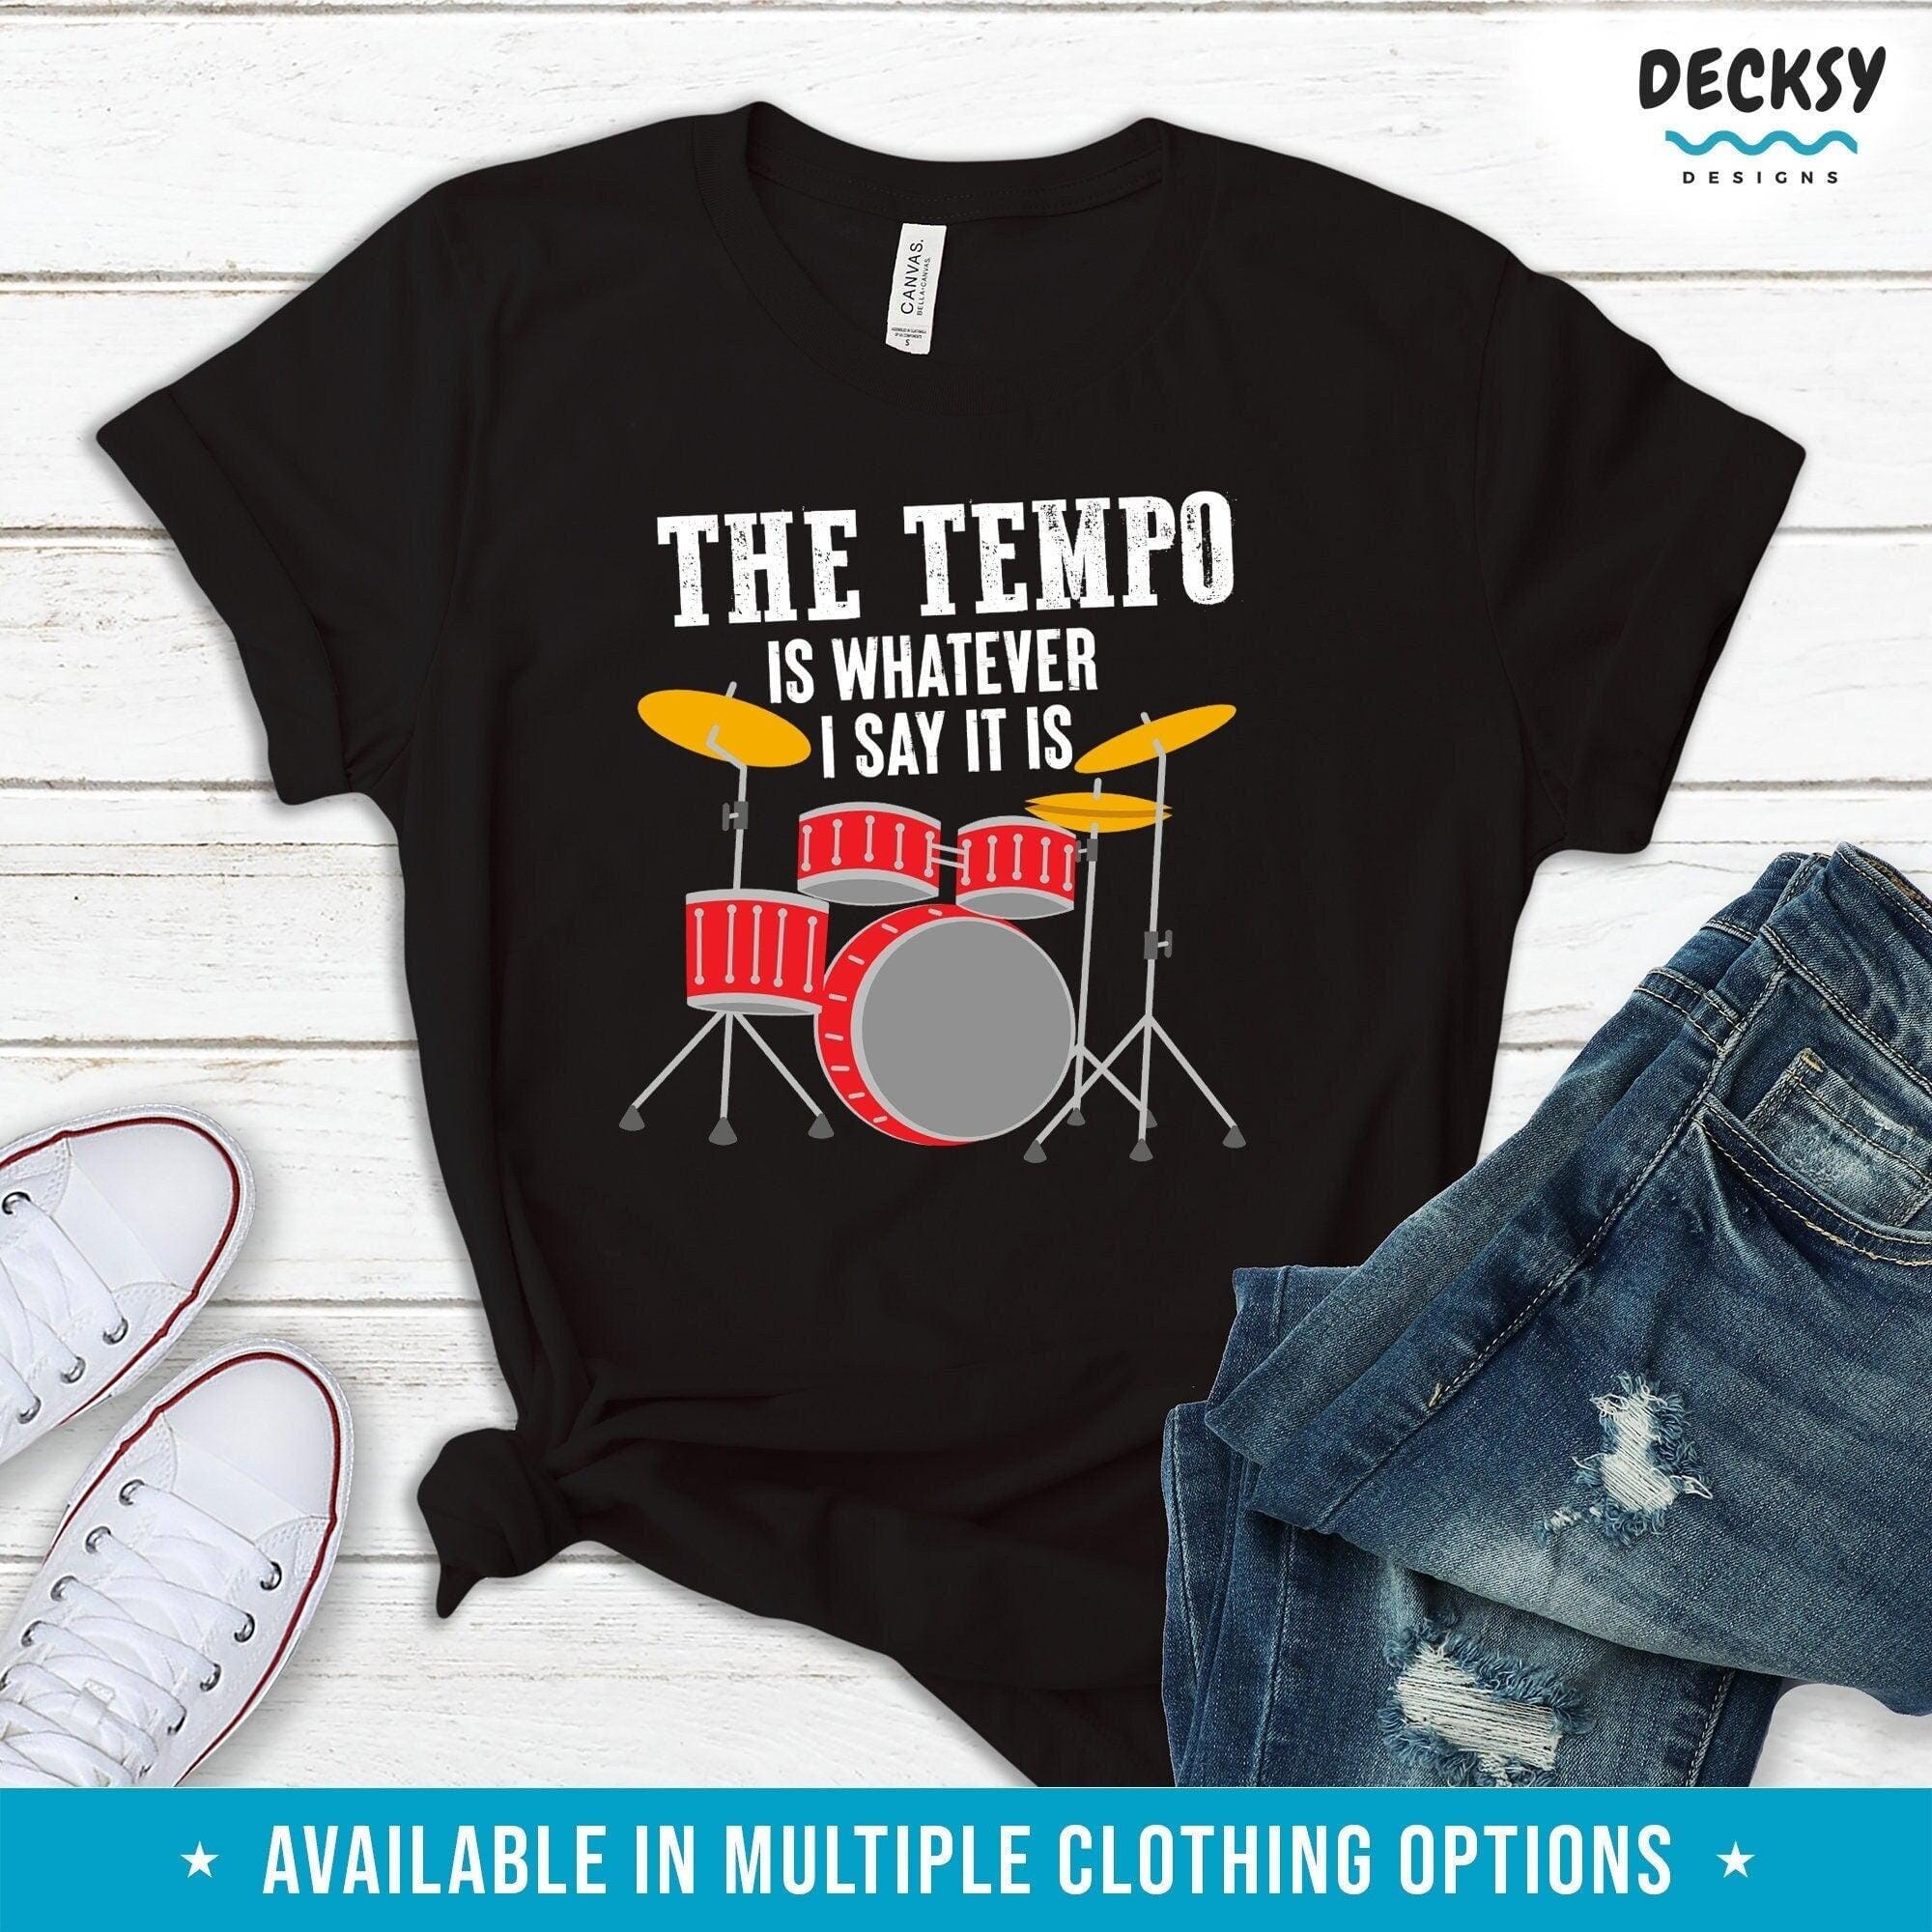 Drummer Tee Shirt, Rock Band Gift-Clothing:Gender-Neutral Adult Clothing:Tops & Tees:T-shirts:Graphic Tees-DecksyDesigns